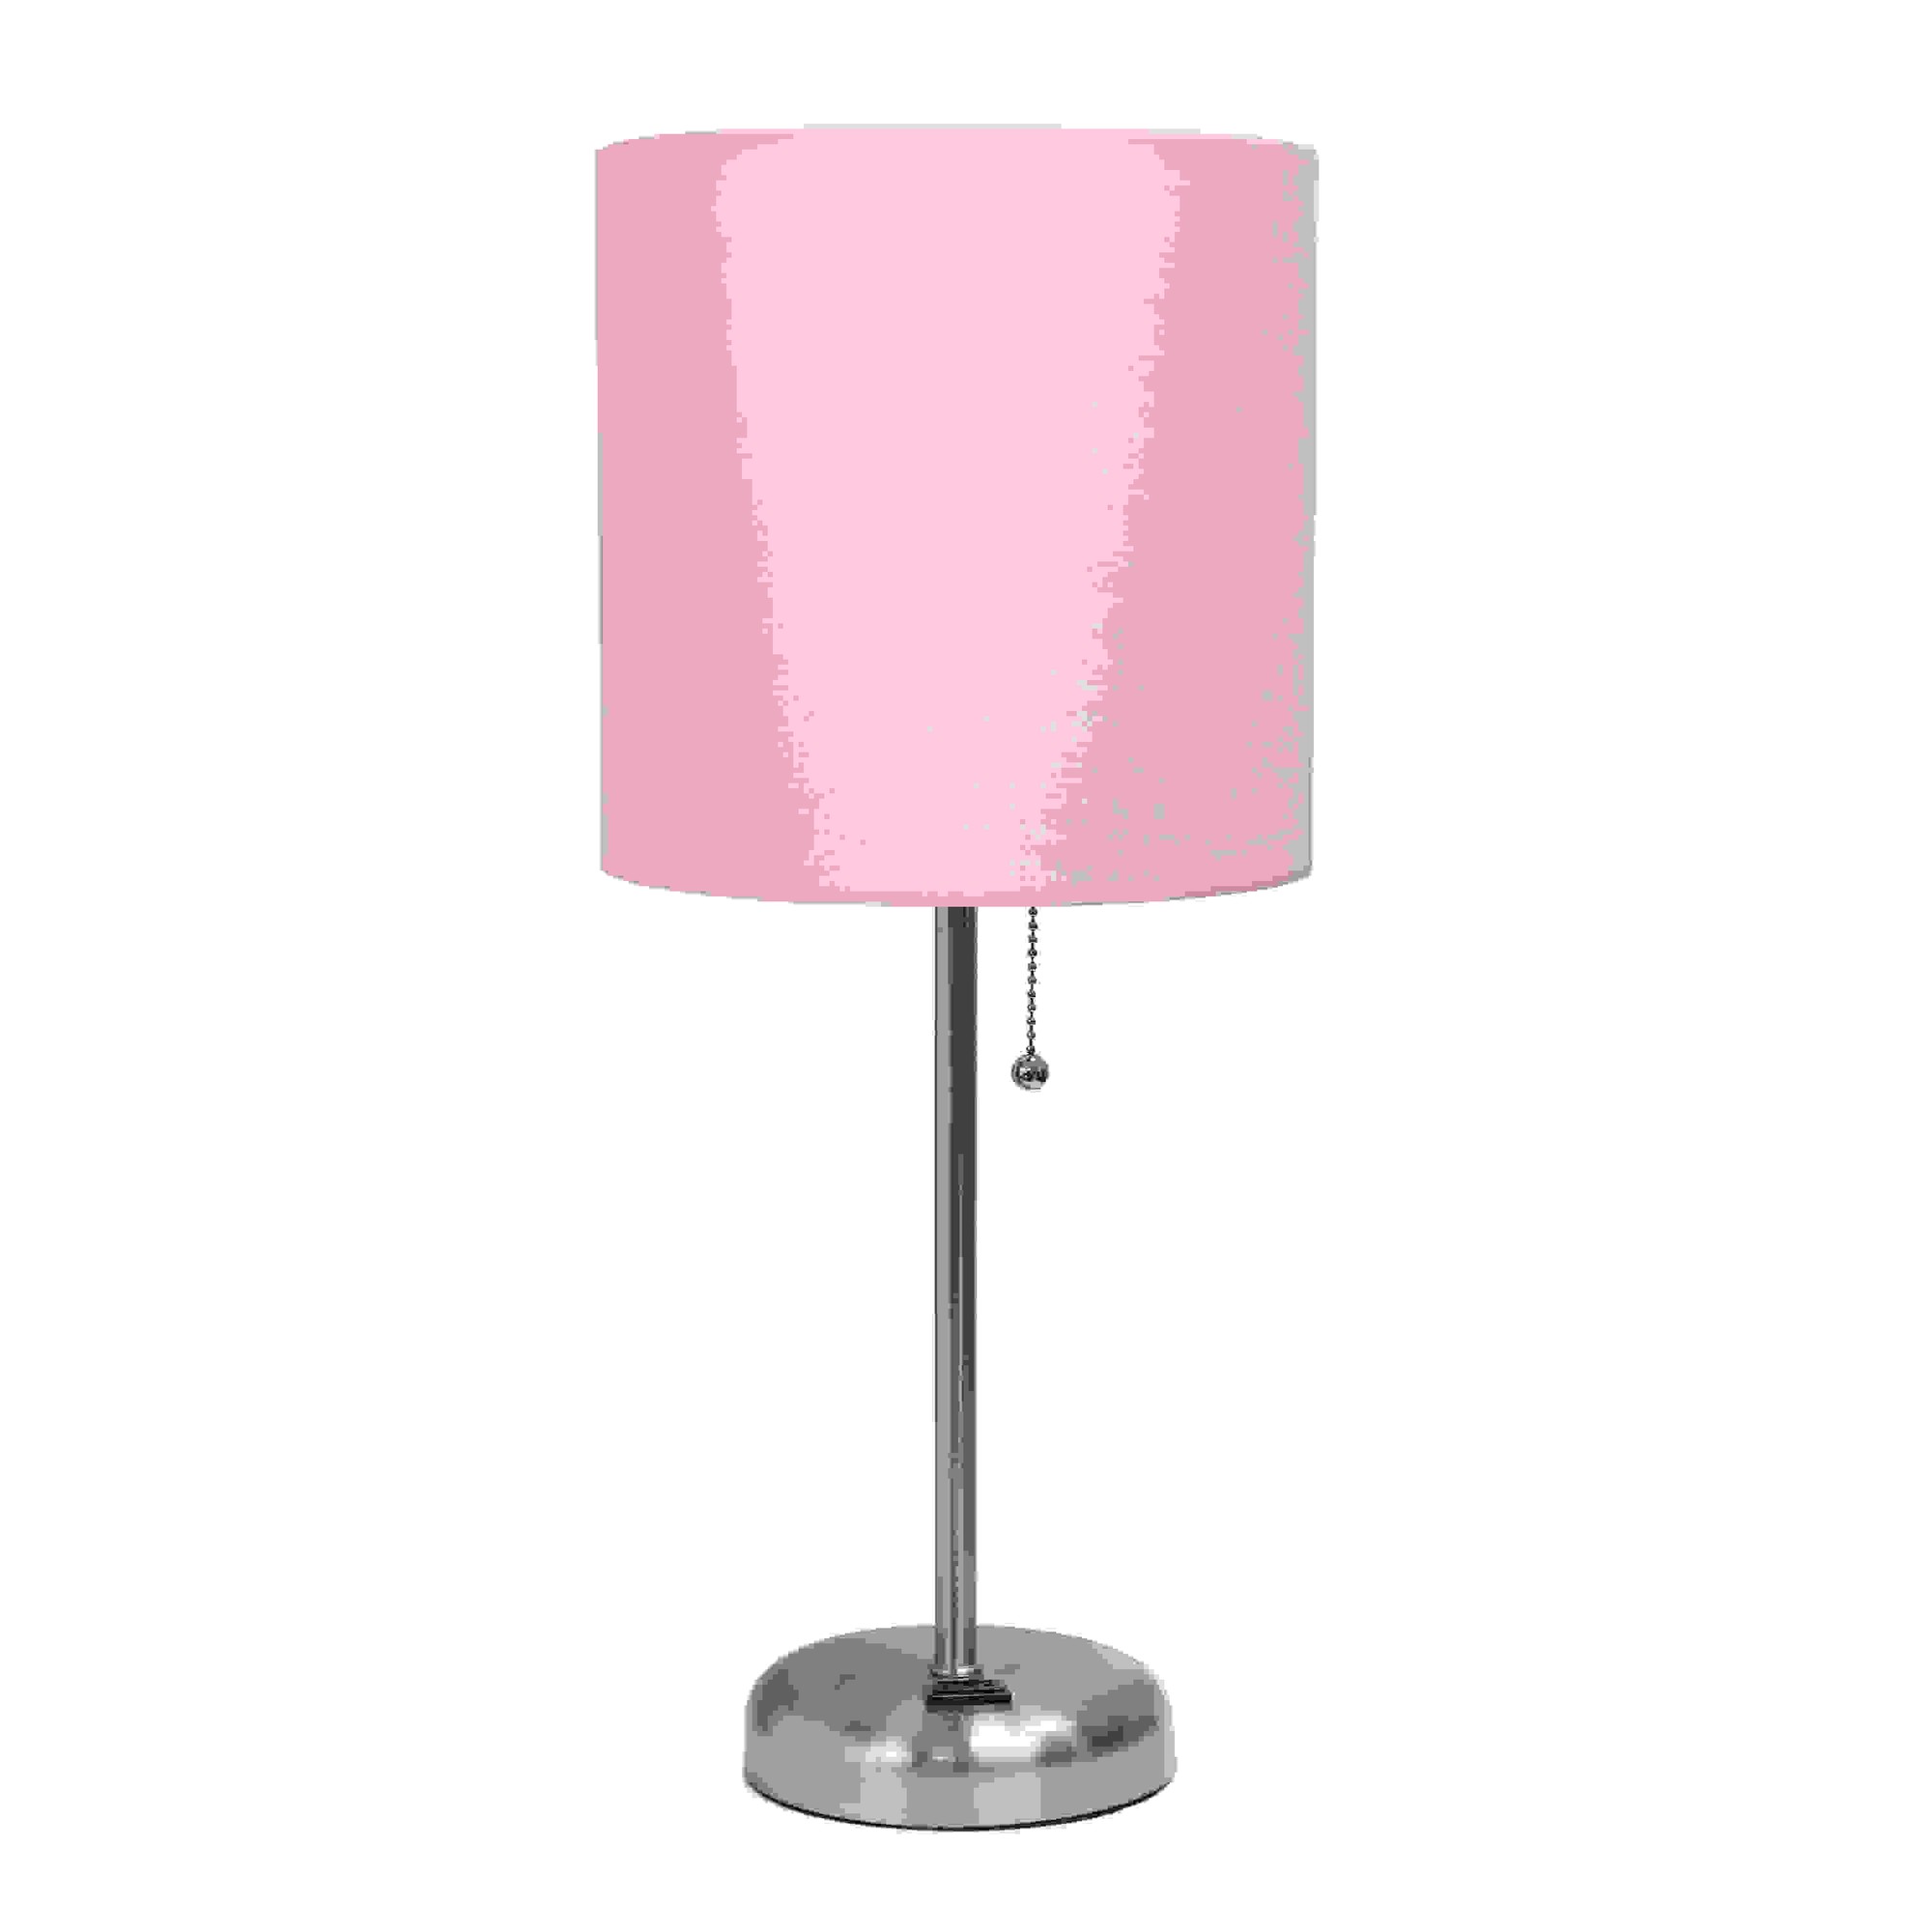 Simple Designs Stick Lamp with Charging Outlet and Fabric Shade, Light Pink